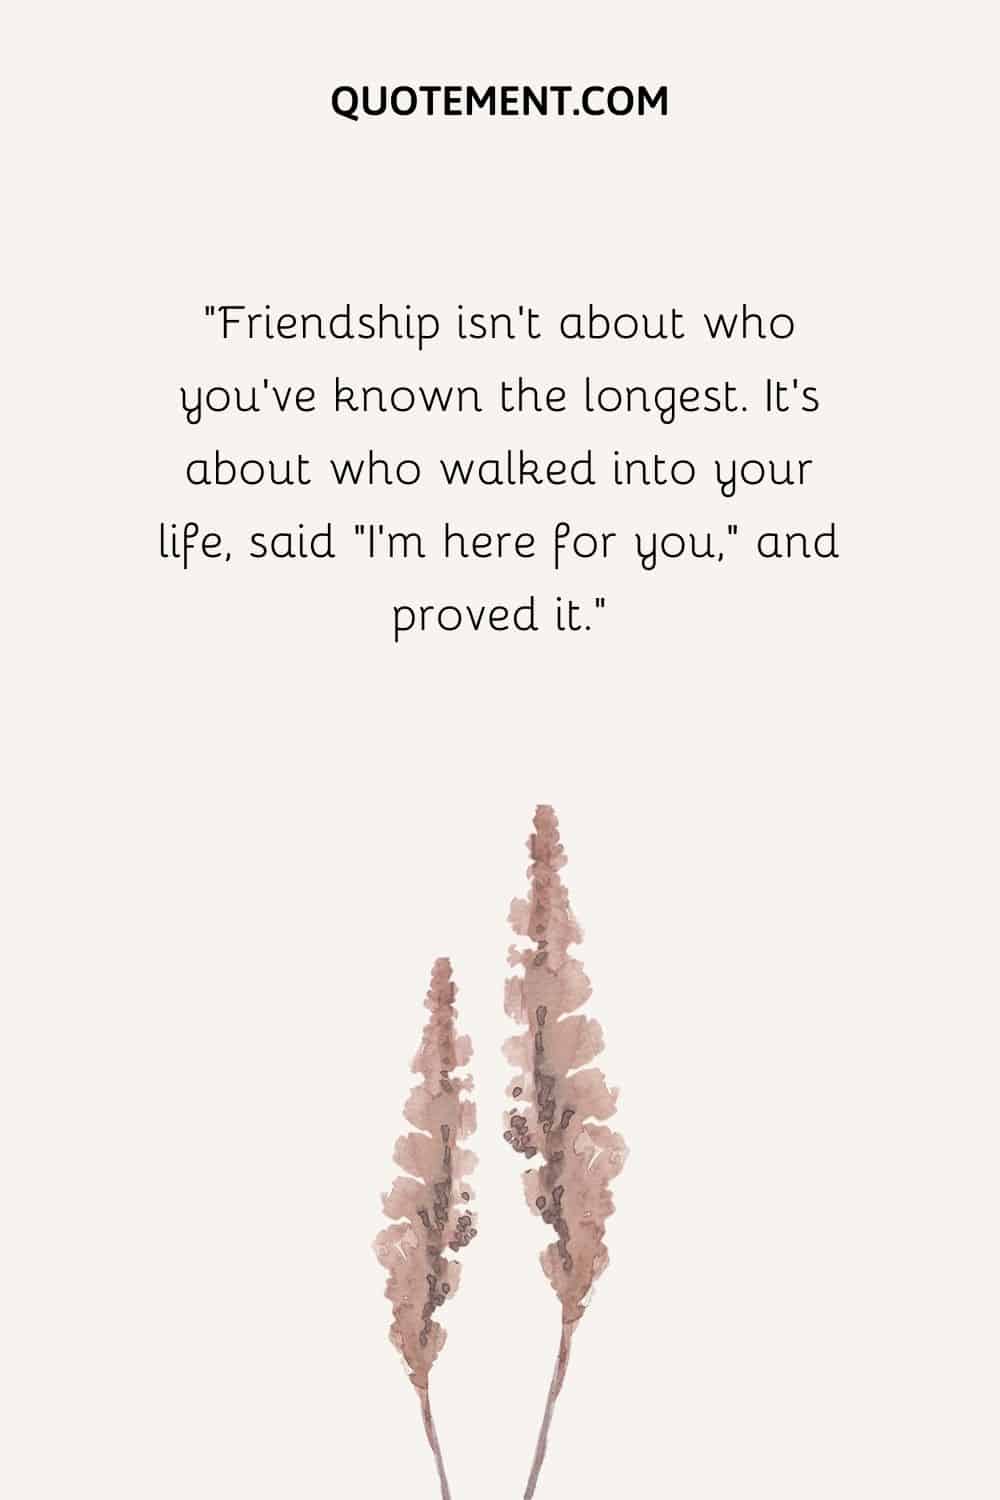 Friendship isn’t about who you’ve known the longest. It’s about who walked into your life, said “I’m here for you,” and proved it.